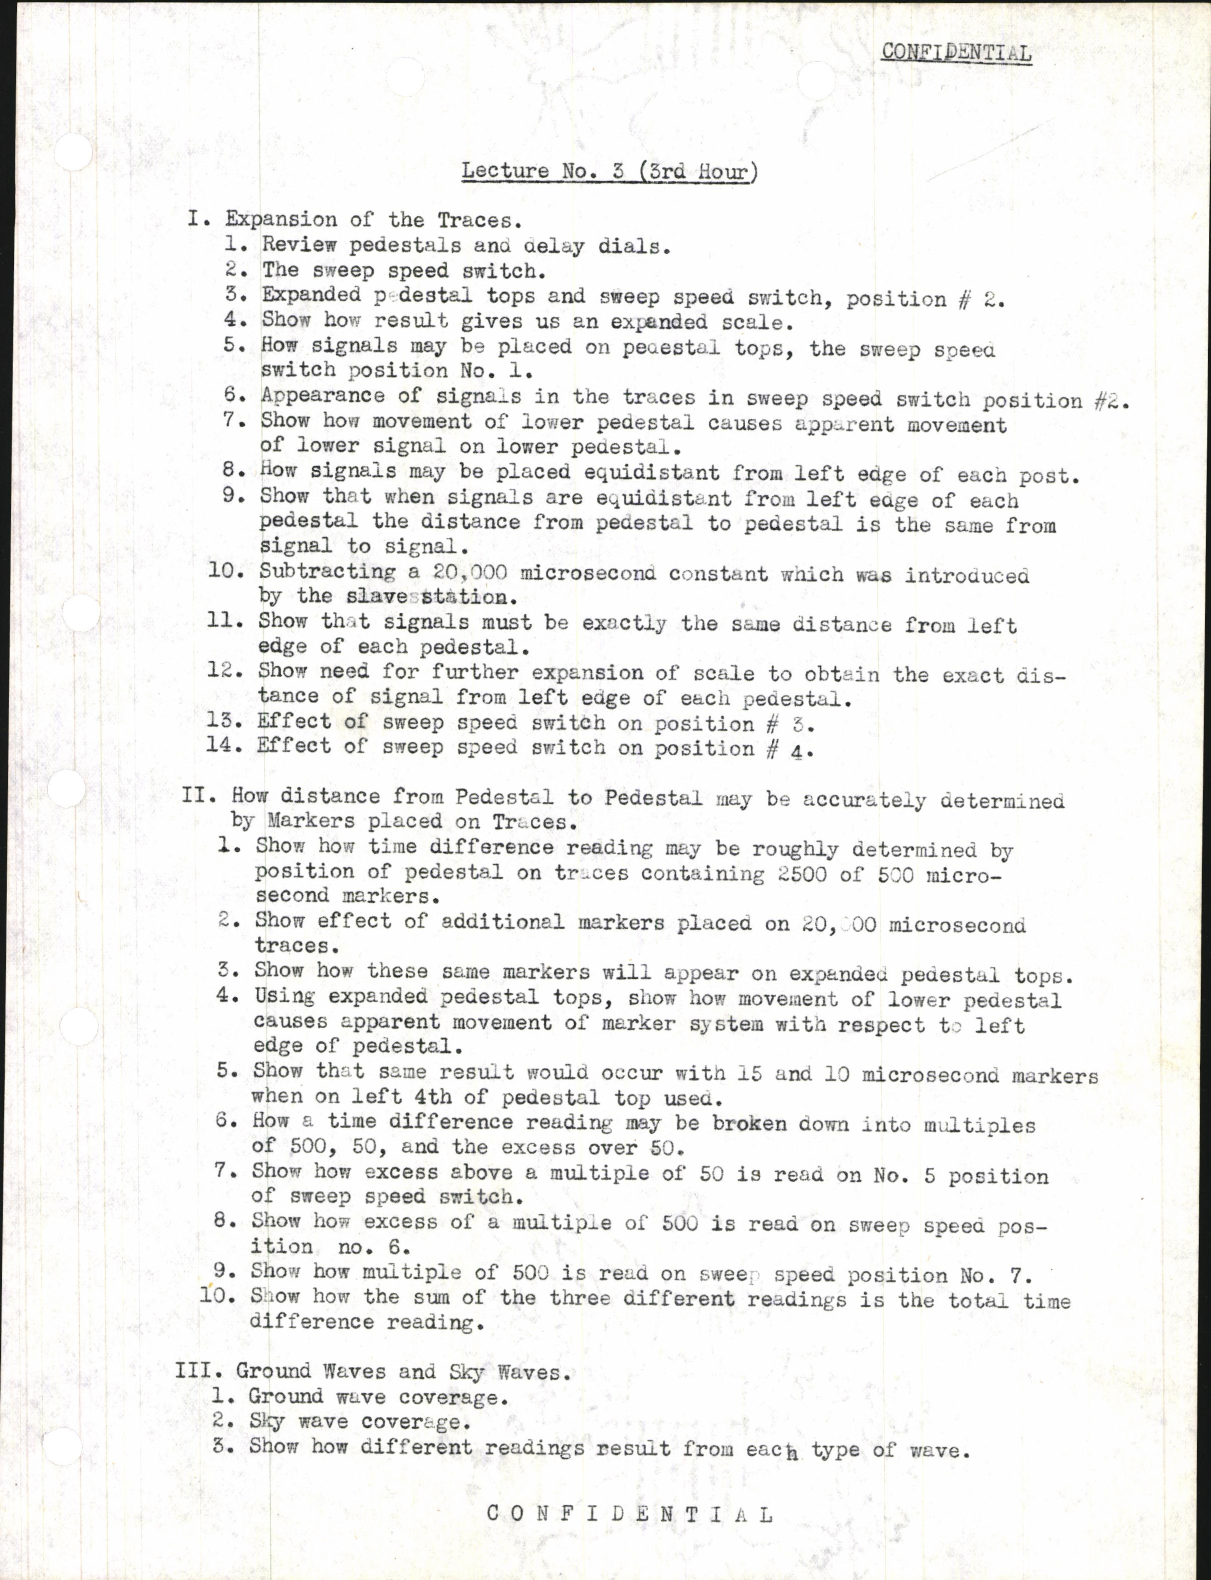 Sample page 5 from AirCorps Library document: Loran Operator's Course